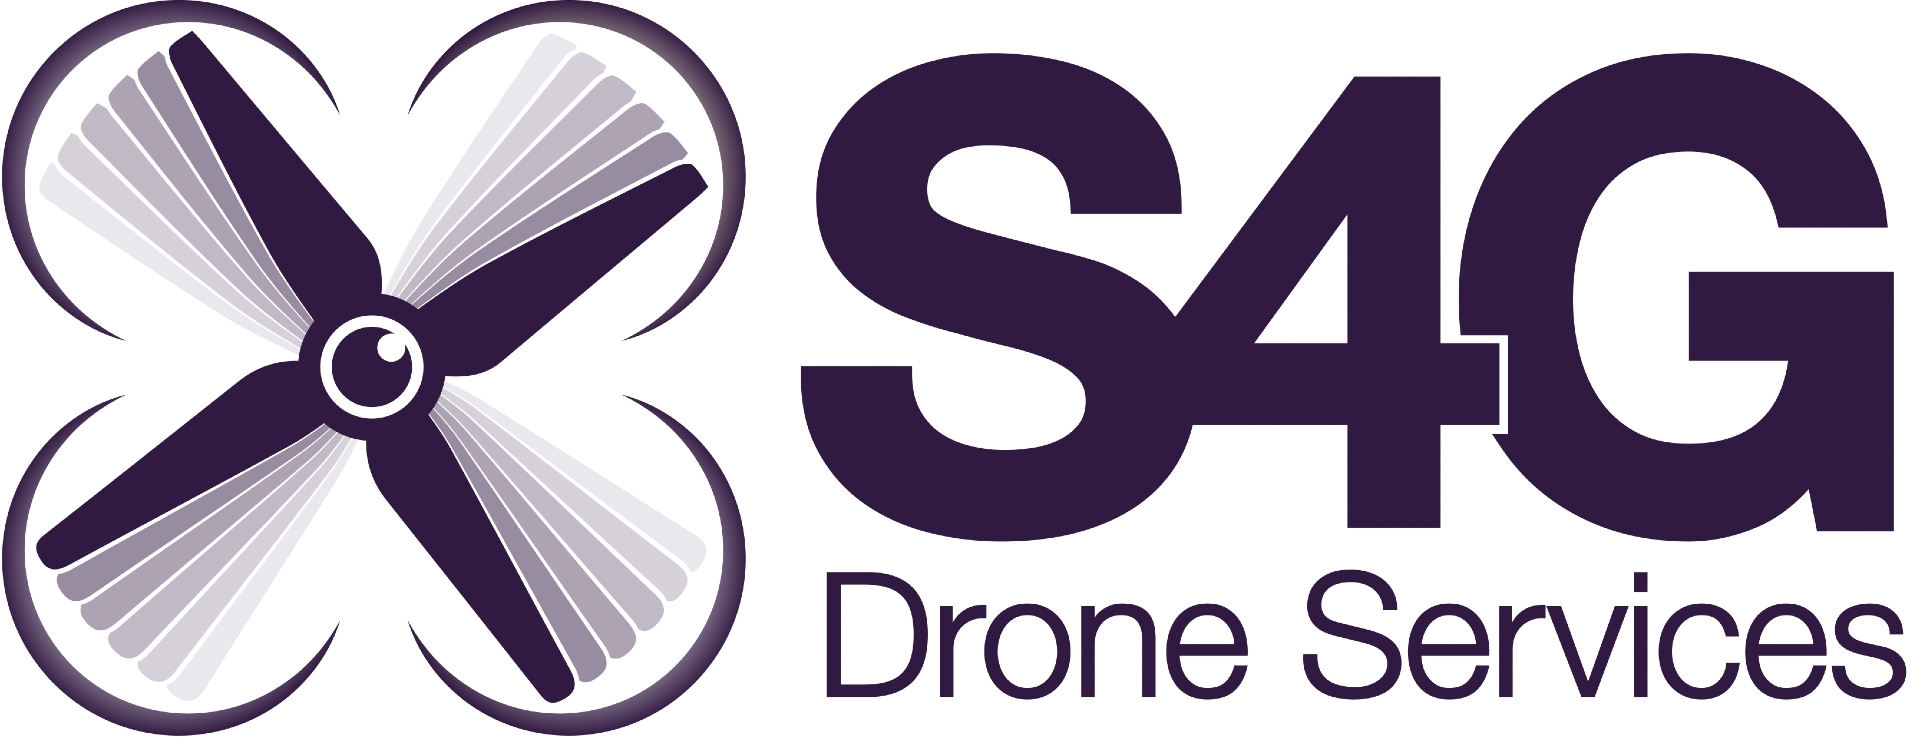 Drone Services S4G